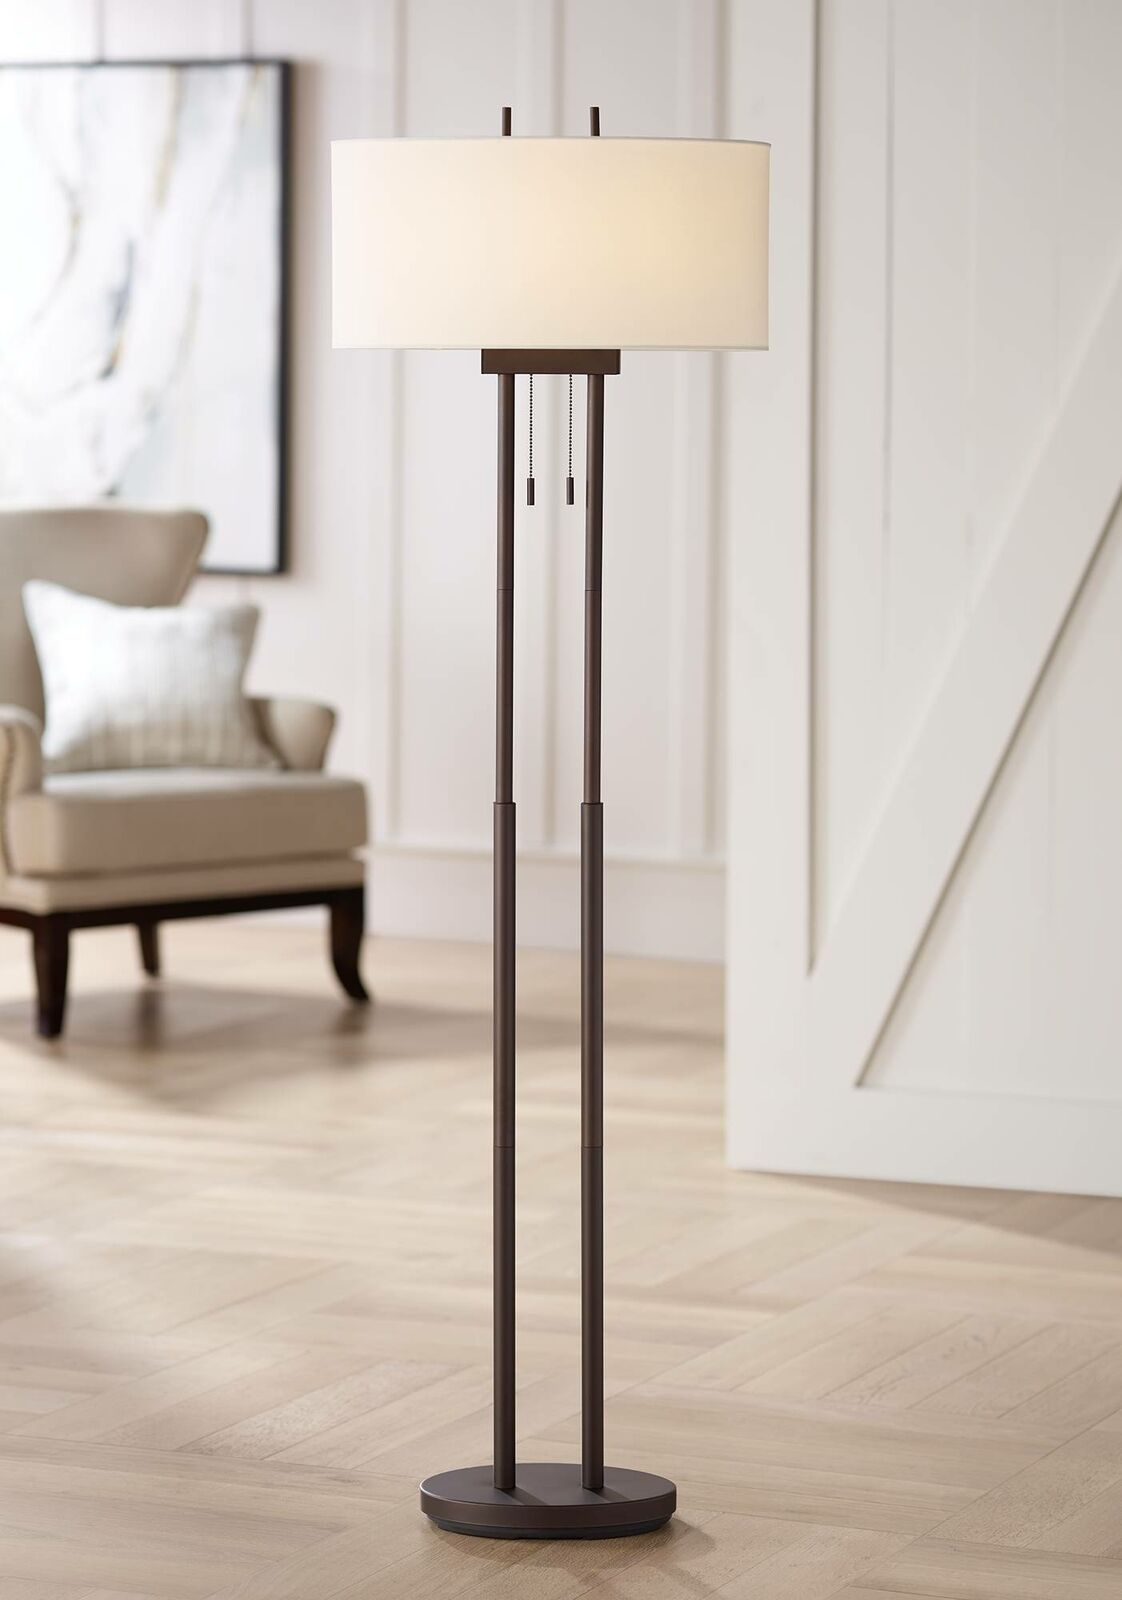 Modern Floor Lamp Twin Pole Oil Rubbed Bronze White Drum Shade For Living Room regarding measurements 1122 X 1600